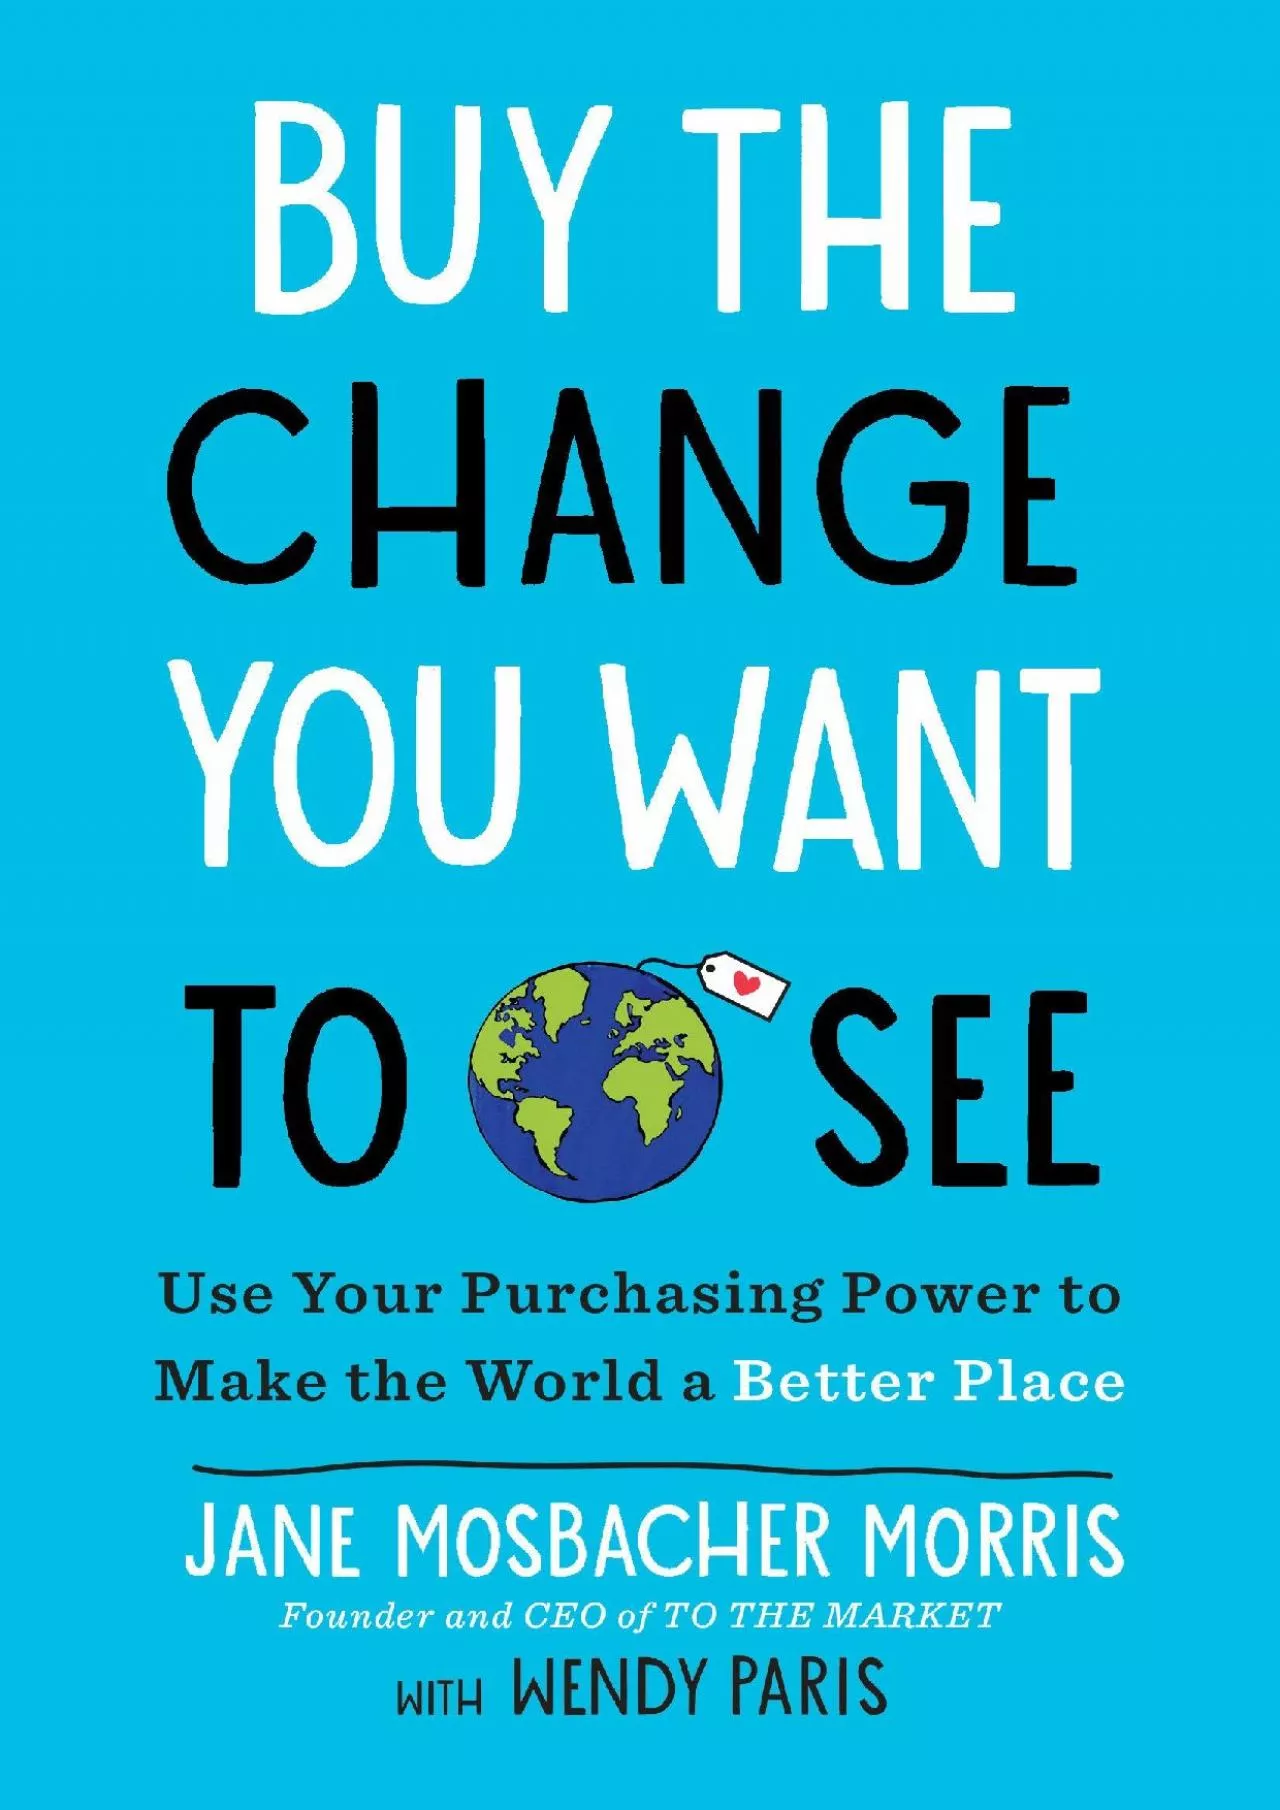 (BOOS)-Buy the Change You Want to See: Use Your Purchasing Power to Make the World a Better